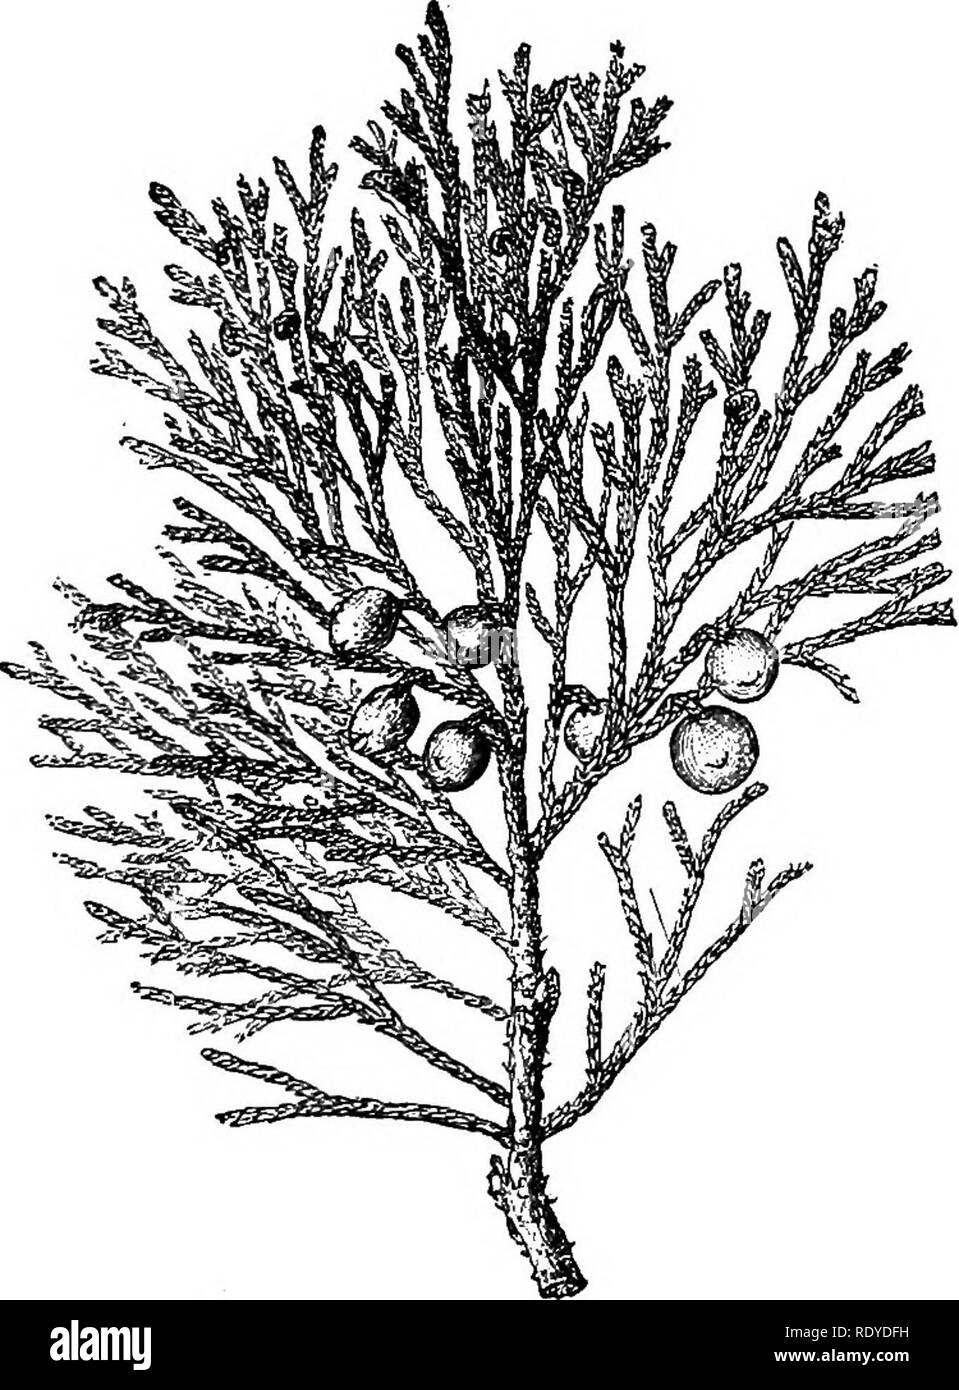 . A manual of poisonous plants, chiefly of eastern North America, with brief notes on economic and medicinal plants, and numerous illustrations. Poisonous plants. Fig. 139. Red Cedar (Juniperus firginiana). To the left a branch from an old tree; to the right juvenile shoots, spiny. &gt; The plant is poisonous and injurious. Juniperus occidentalis. Hooker A shrub or small tree, with bark in shreds; leaves pale in color, closely appressed, obtuse or acutish; berries 4-5 lines in diameter. Distribution. Northwest along Pacific Coast. The variety monosperma, Eng., shows stunted trees, frequently 2 Stock Photo